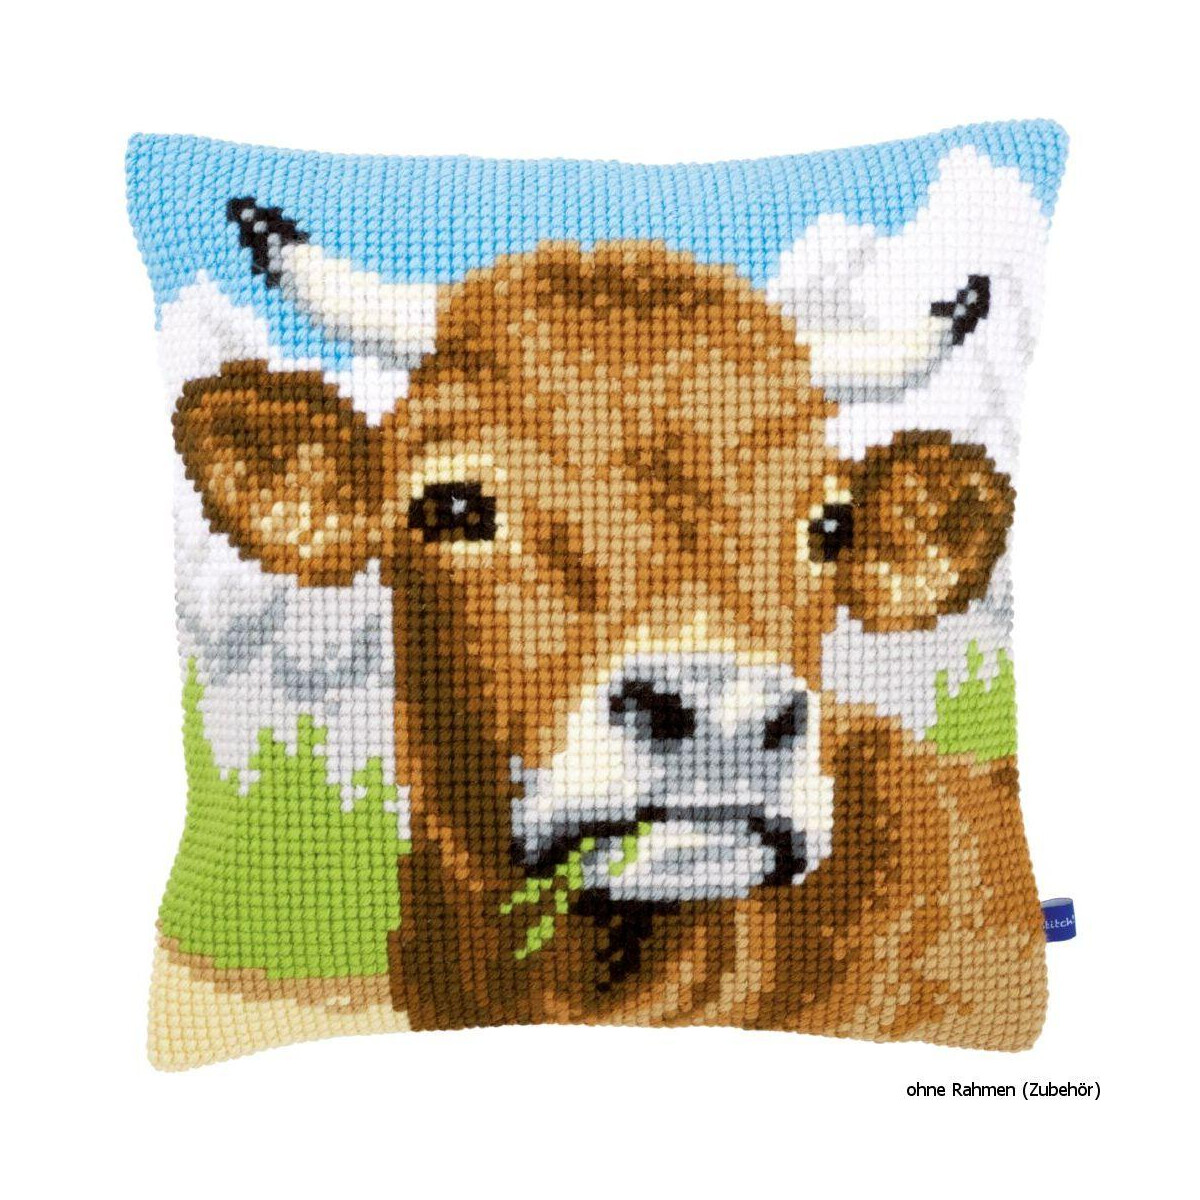 Vervaco stamped cross stitch kit cushion Cow, DIY